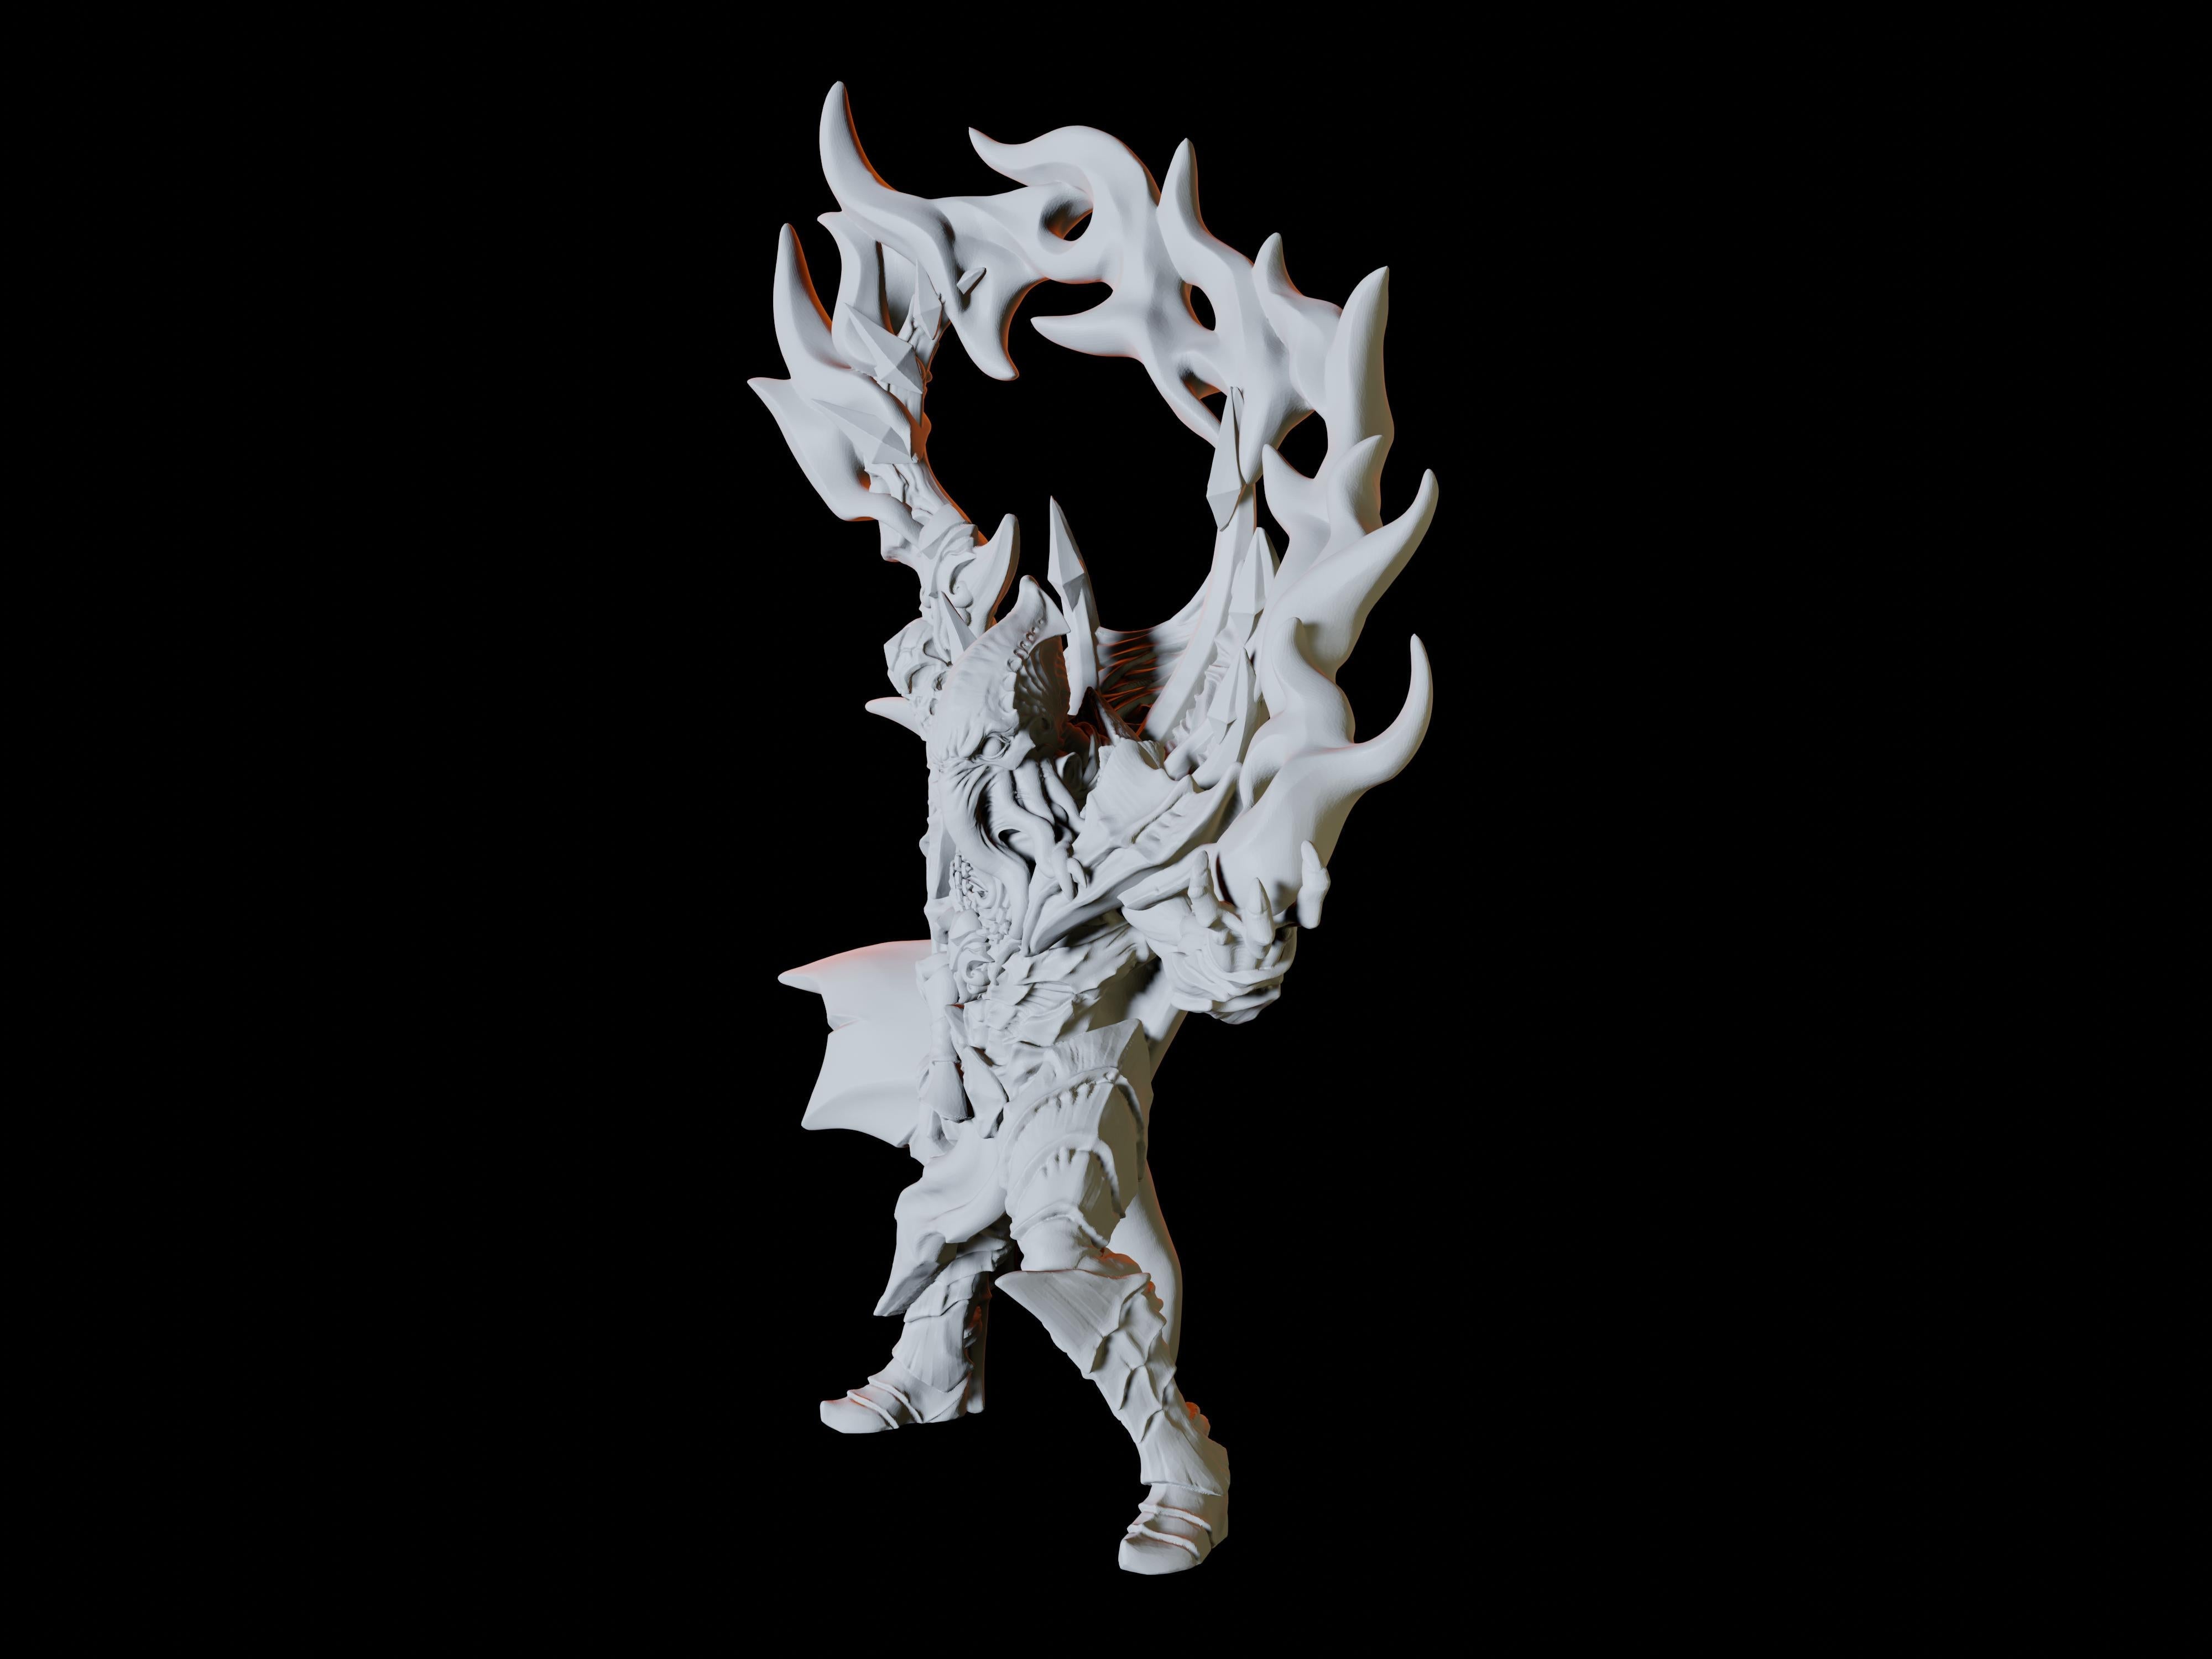 Mind Flayer Sorcerer Miniature for Dungeons and Dragons - Myth Forged